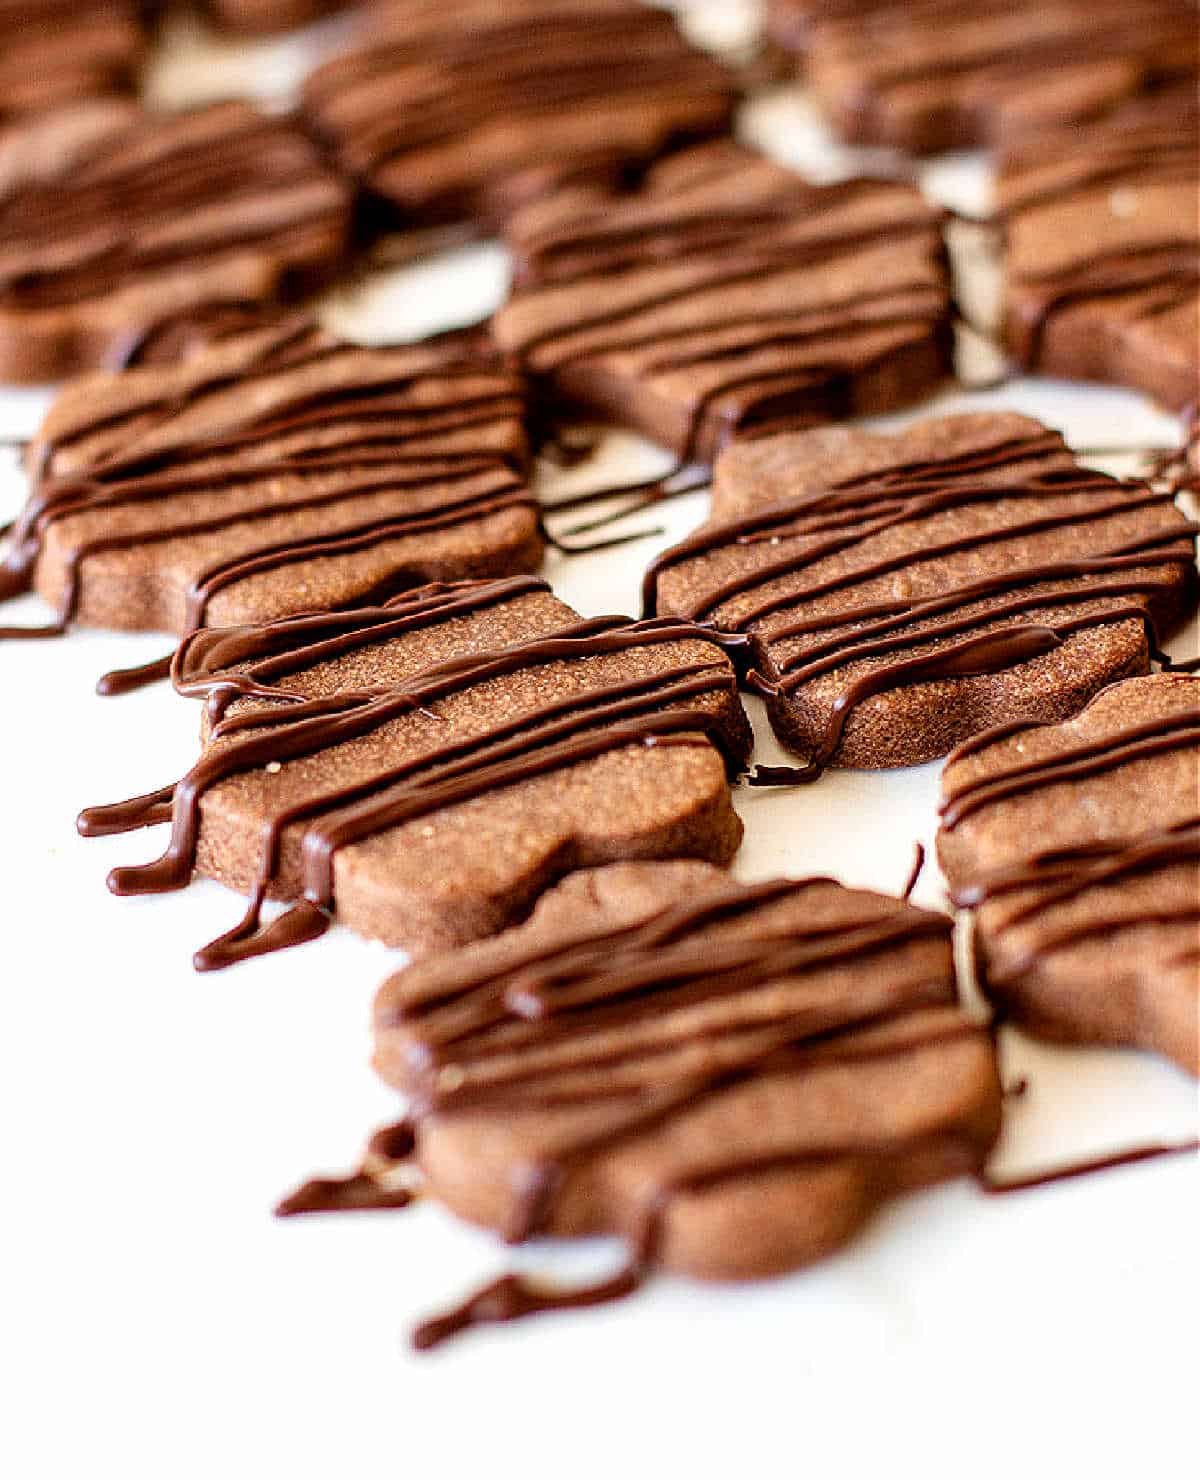 Rows of flower-shaped chocolate cookies topped with chocolate threads on white surface